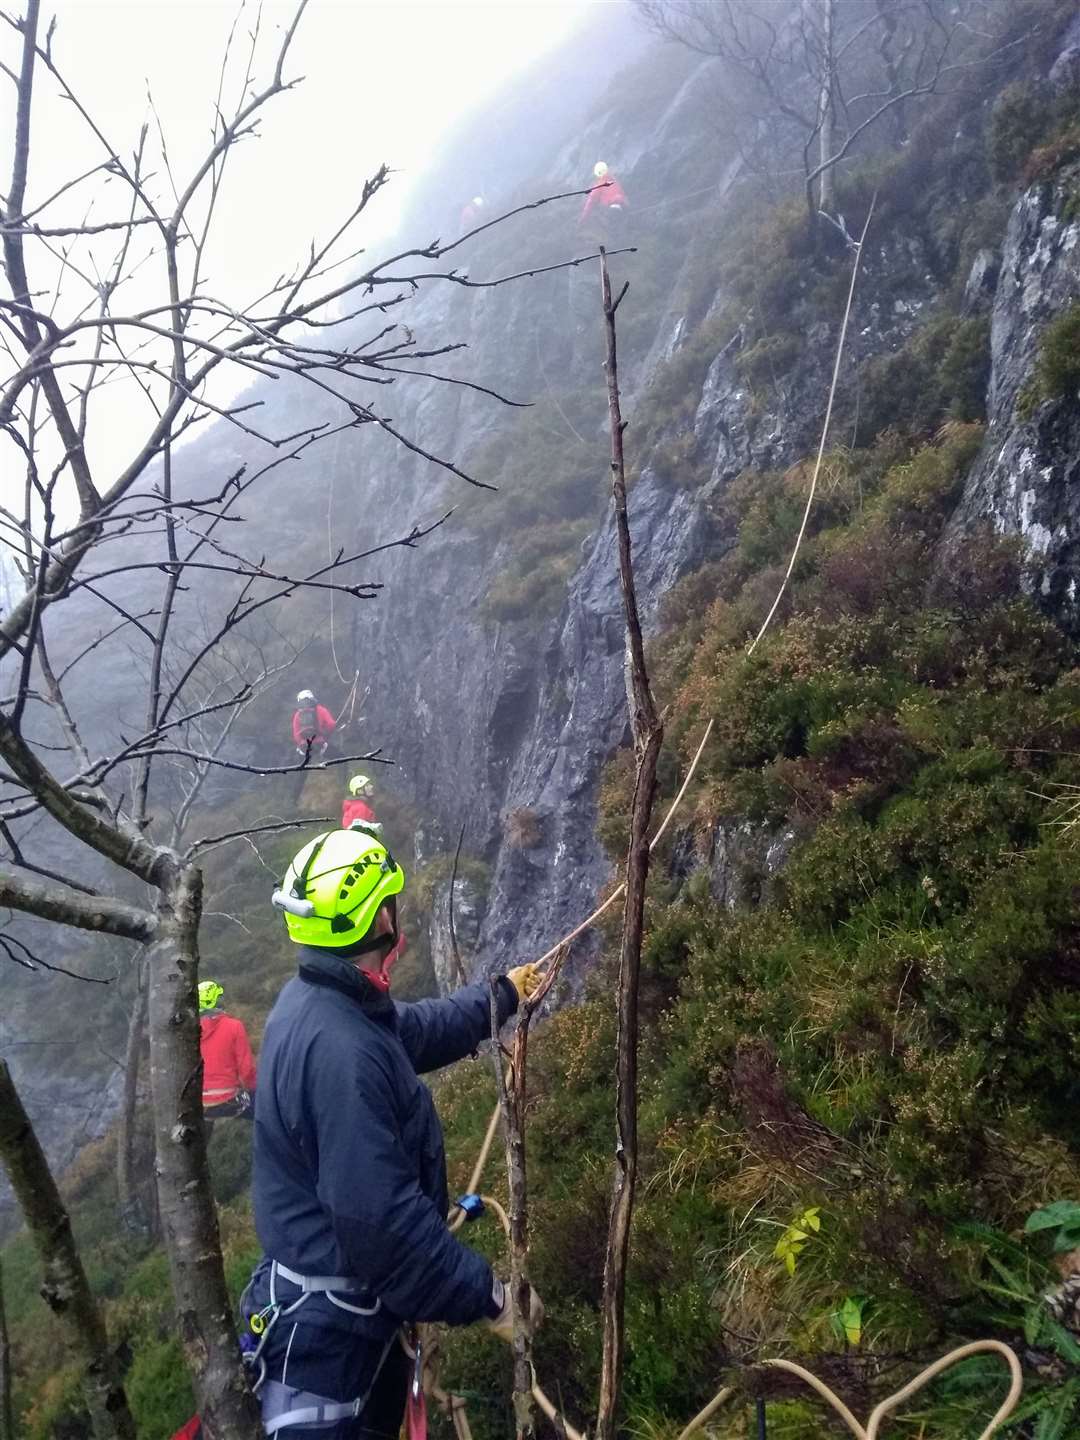 The rescue teams put their own safety on the line.